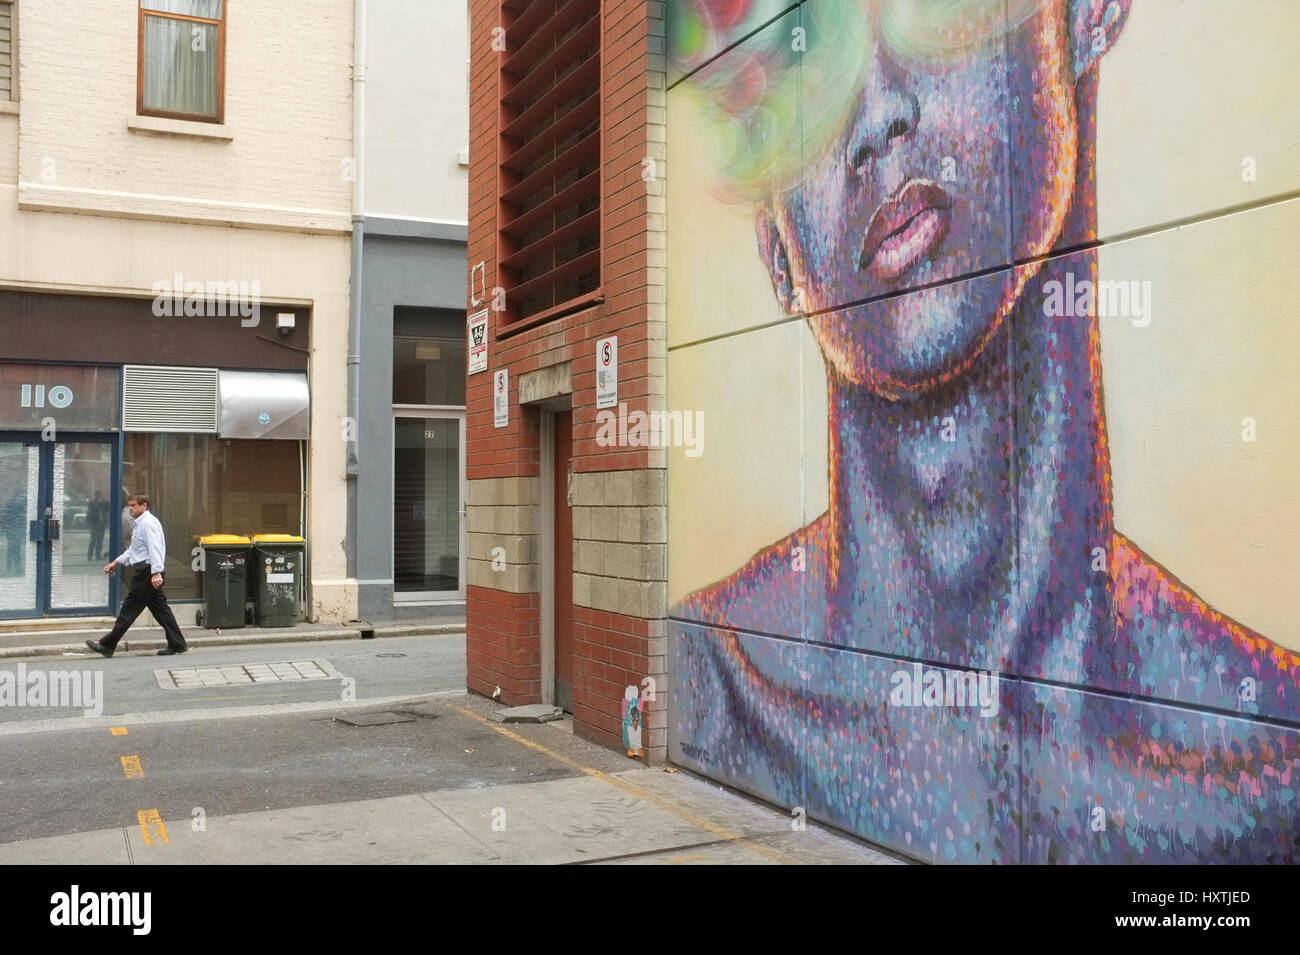 Adelaide Australia. 31st March 2017. A new mural  entitled 'order 55'  by Australian  street artist James Cochran unveiled for the Adelaide Fringe festival and as part of the street art explosion in the city of Adelaide. Jimmy Cohran also known as Jimmy C who famously created the David Bowie memorial painting in Brixton London Credit: amer ghazzal/Alamy Live News Stock Photo